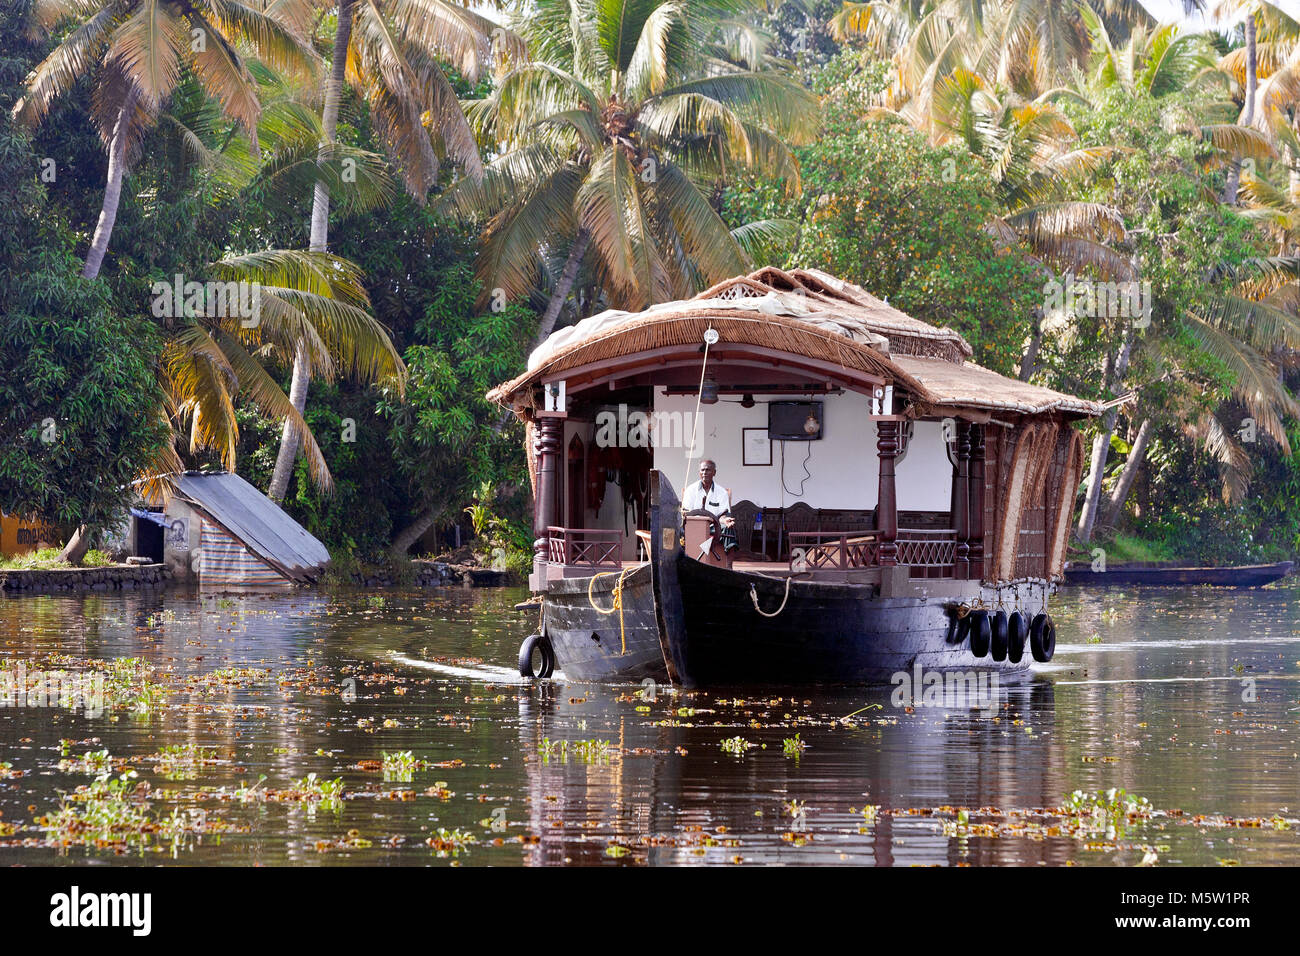 Sailing on a houseboat on the backwaters near Alleppey and Kumarakom in Kerala, India. Stock Photo